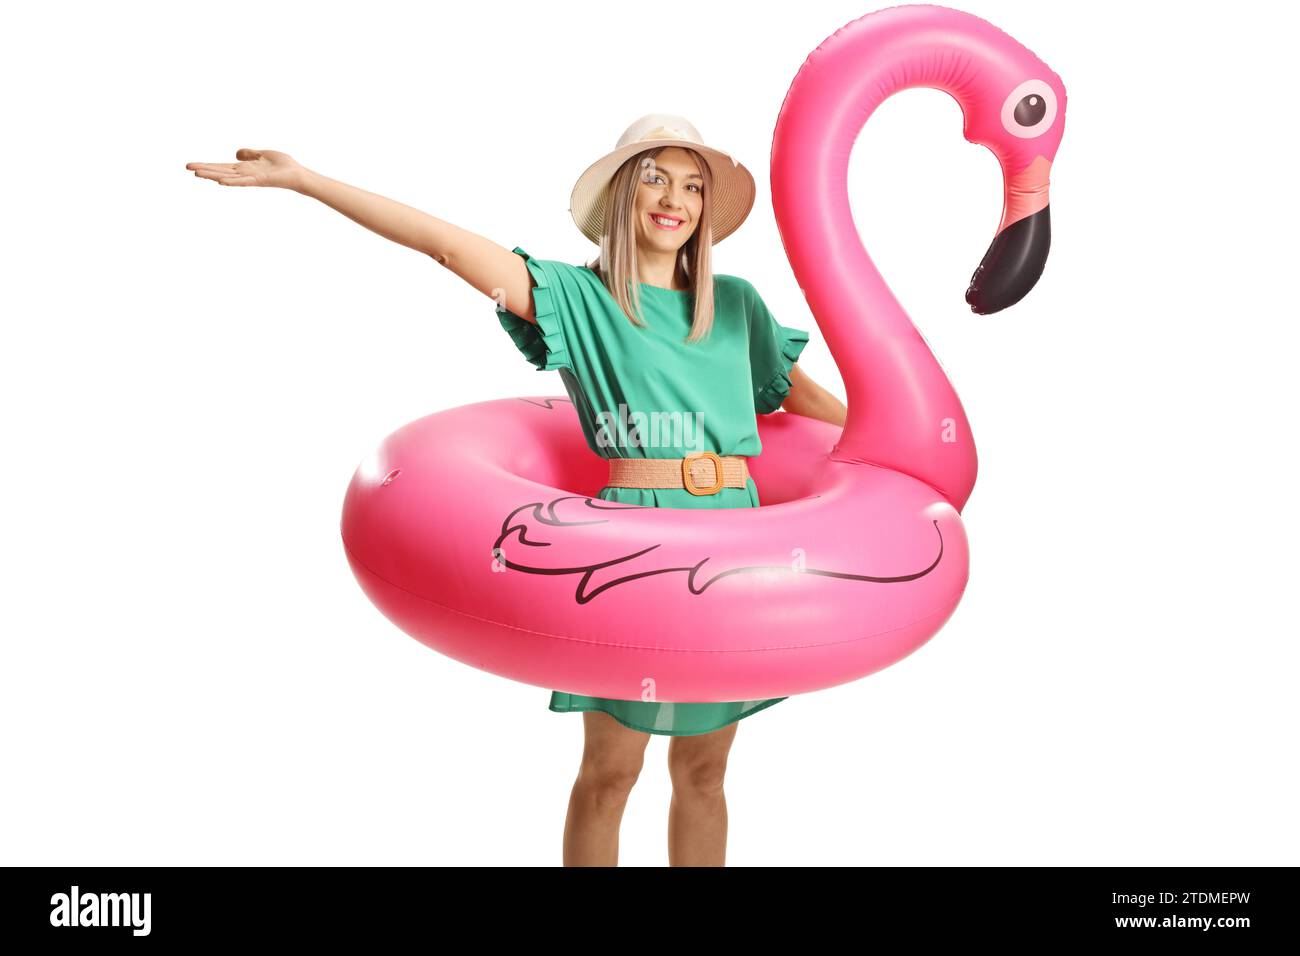 Young happy woman with a flamingo rubber ring isolated on white background Stock Photo